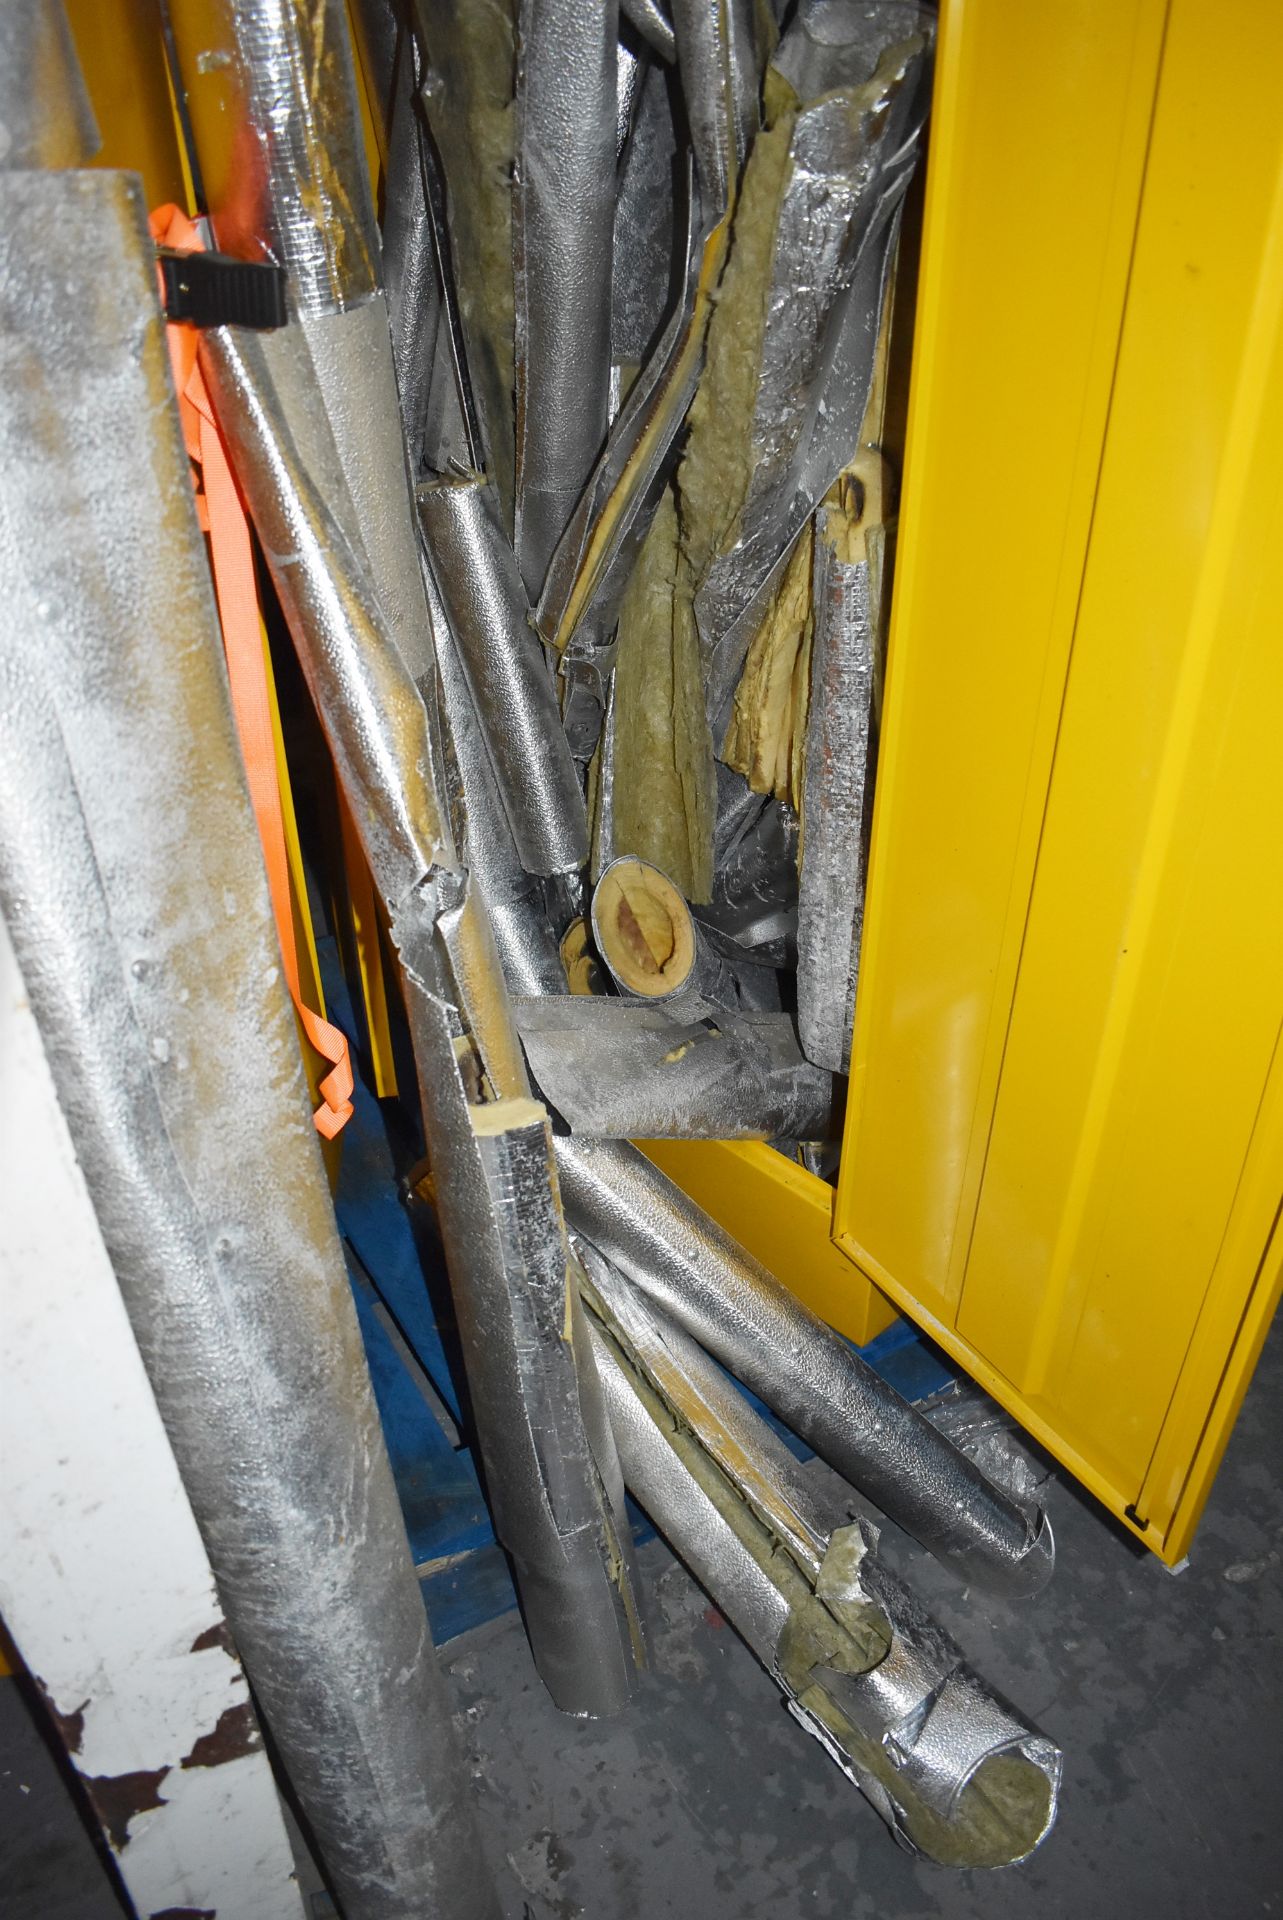 Large Quantity of Thermal Pipe Covering Contents of Two Upright Cabinets - Cabinets Not Included - - Image 10 of 10